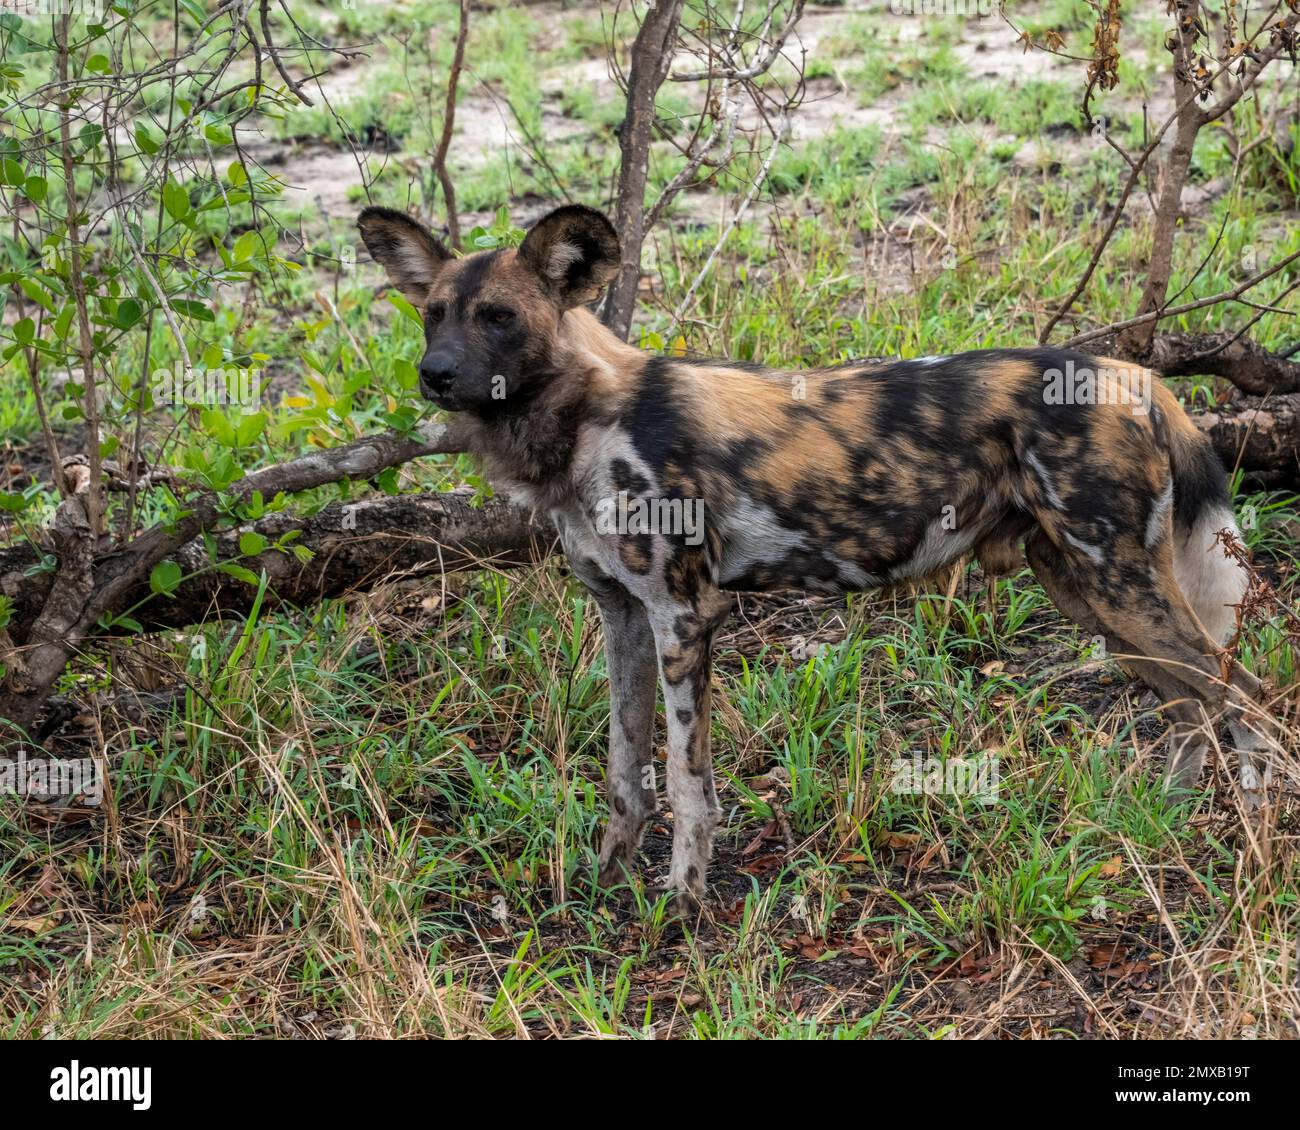 African Painted Dog standing in a Grassy Forest Glade Stock Photo